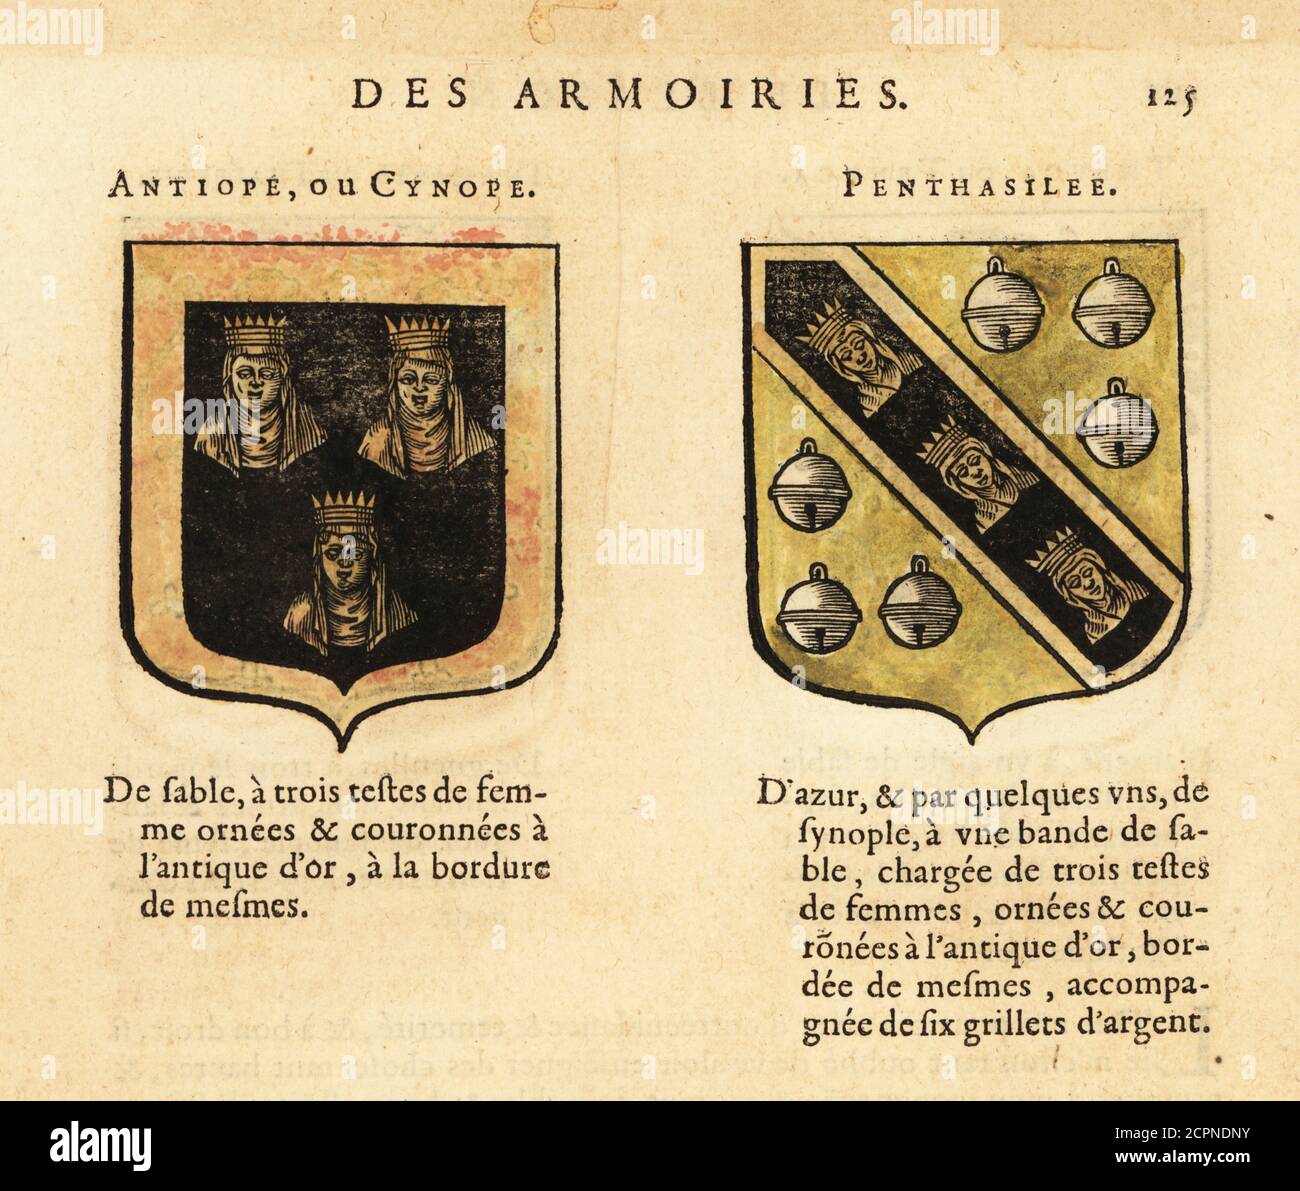 Imaginary coats of arms of Queens of the Amazons Antiope, with three crowned women’s heads, and Penthesilea, with three crowned women’s heads and six silver bells. Nine Worthy Women. ANTIOPE ou CYNOPE, PENTHASILEE. Handcoloured woodblock engraving from Hierosme de Bara’s Le Blason des Armoiries, Chez Rolet Boutonne, Paris, 1628 Stock Photo